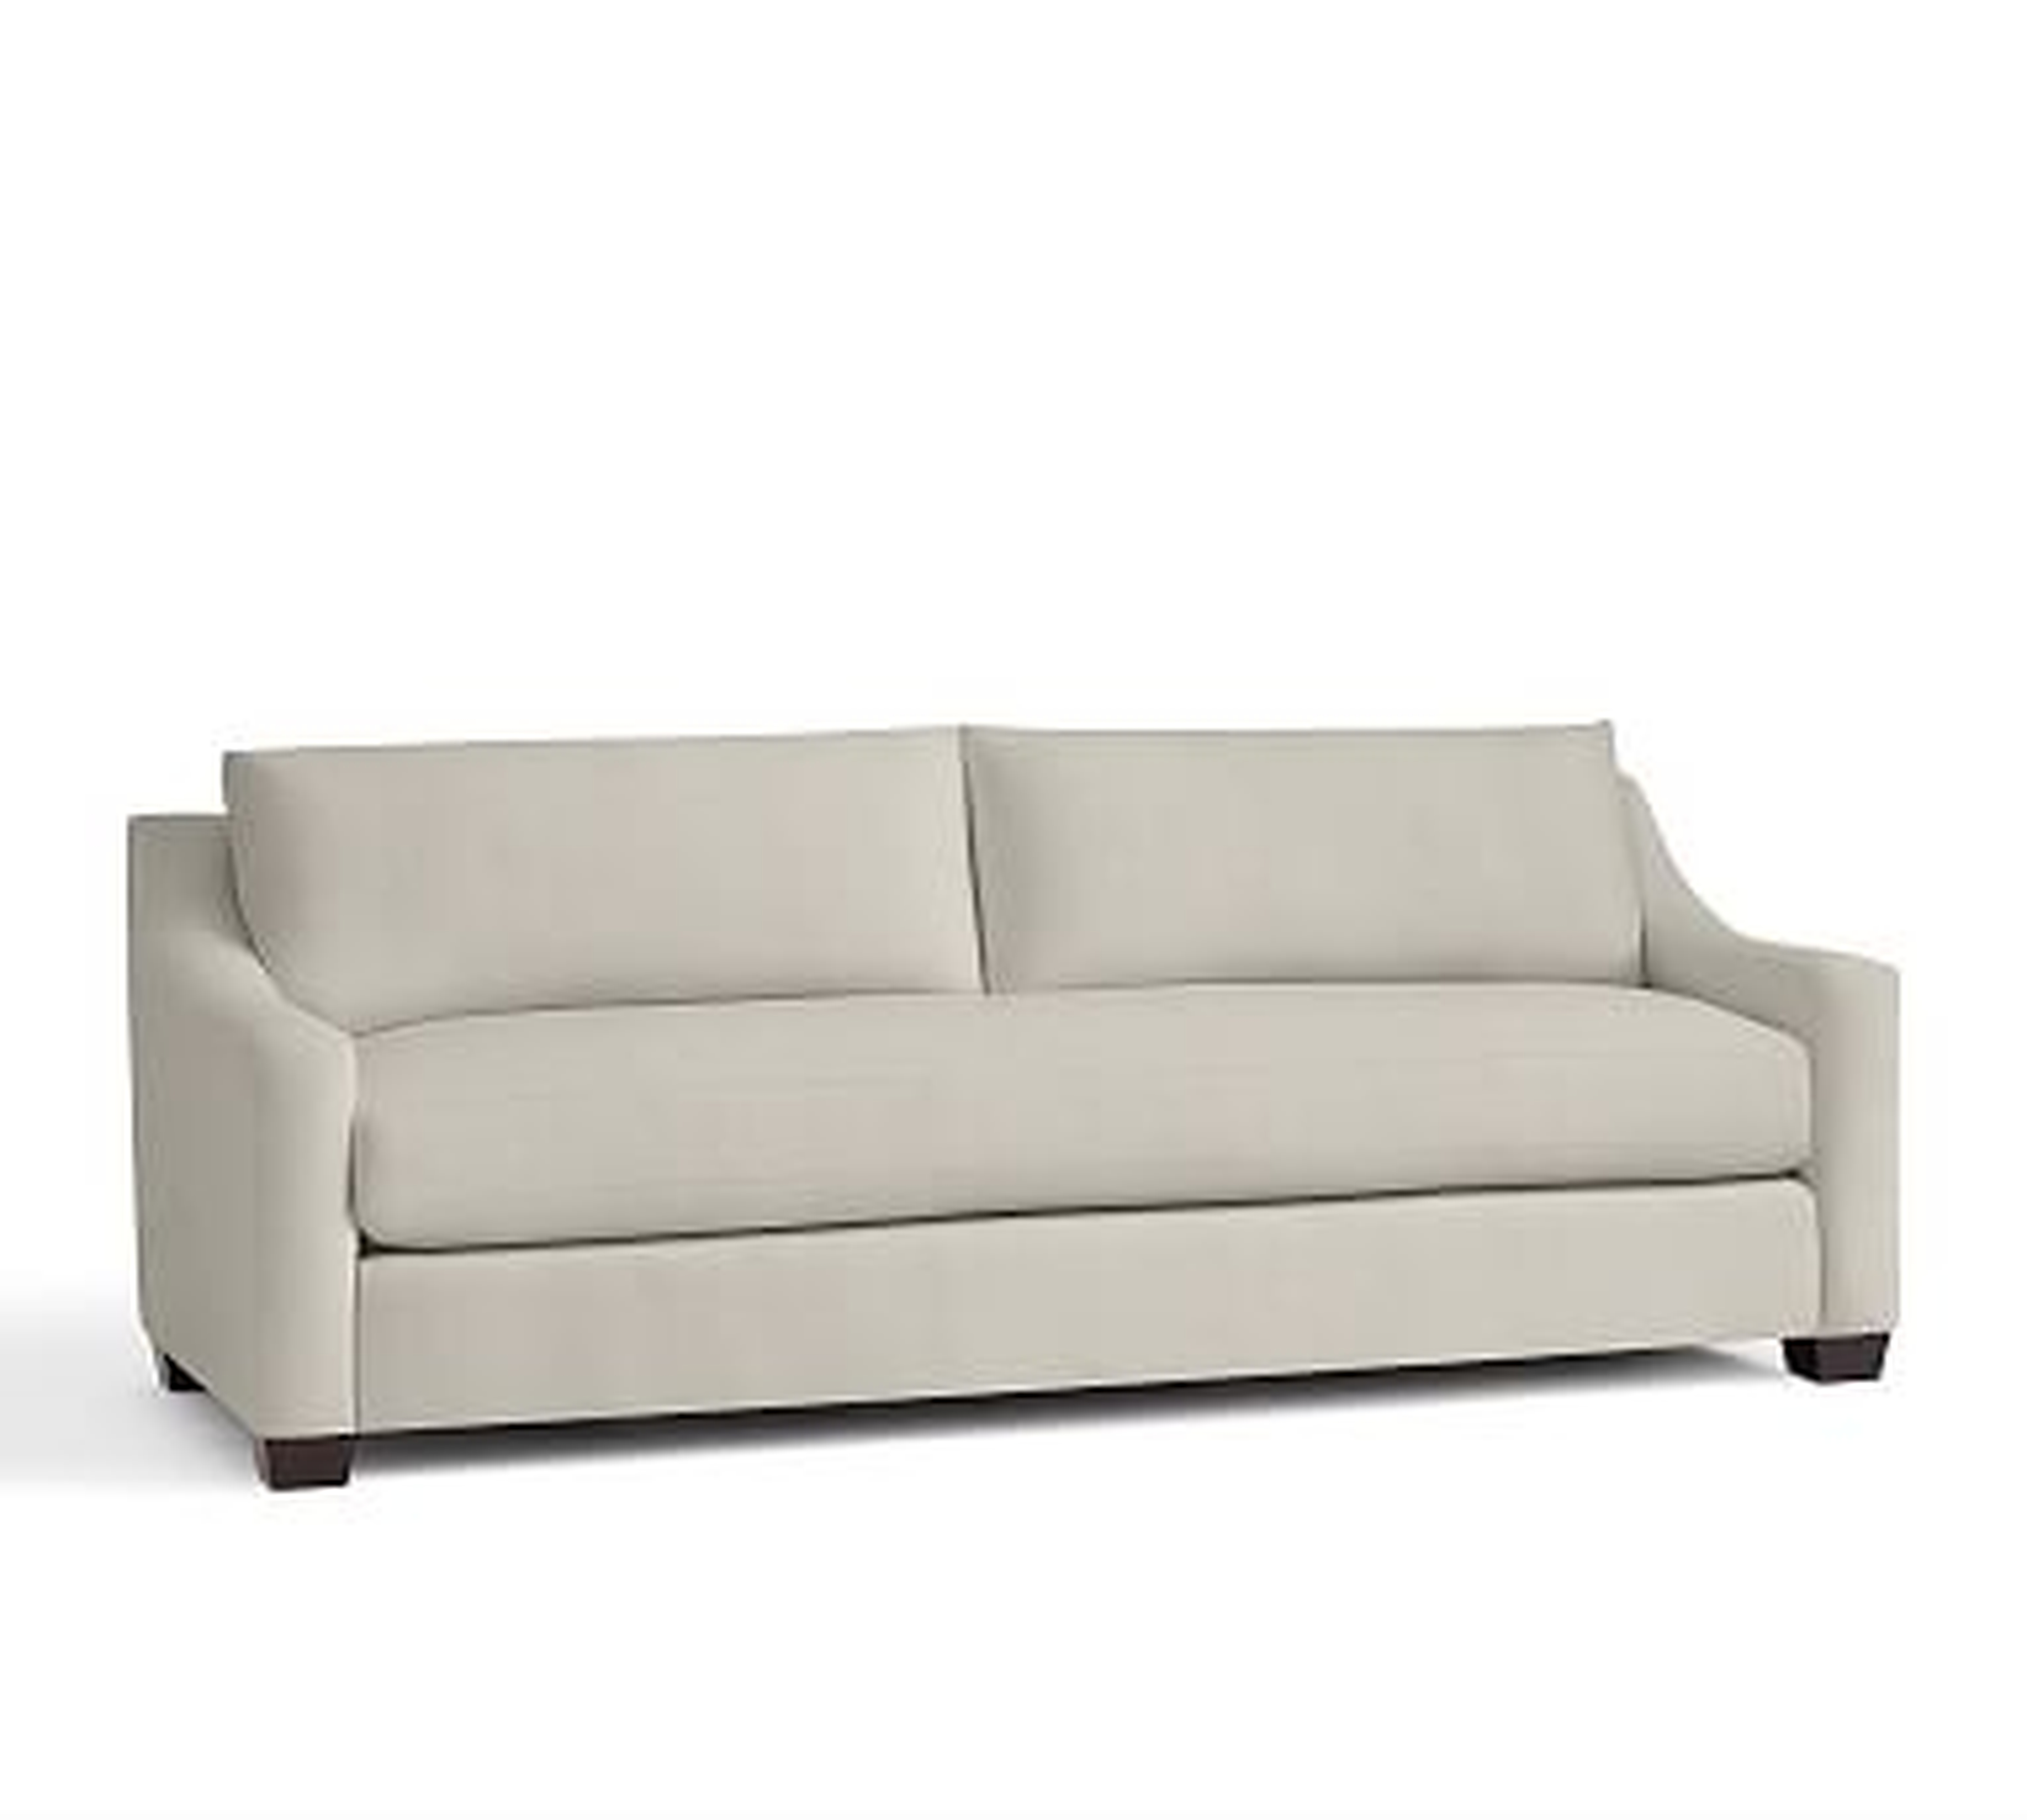 York Slope Arm Upholstered Sofa 80.5" with Bench Cushion, Down Blend Wrapped Cushions, Performance Everydaysuede(TM) Stone - Pottery Barn